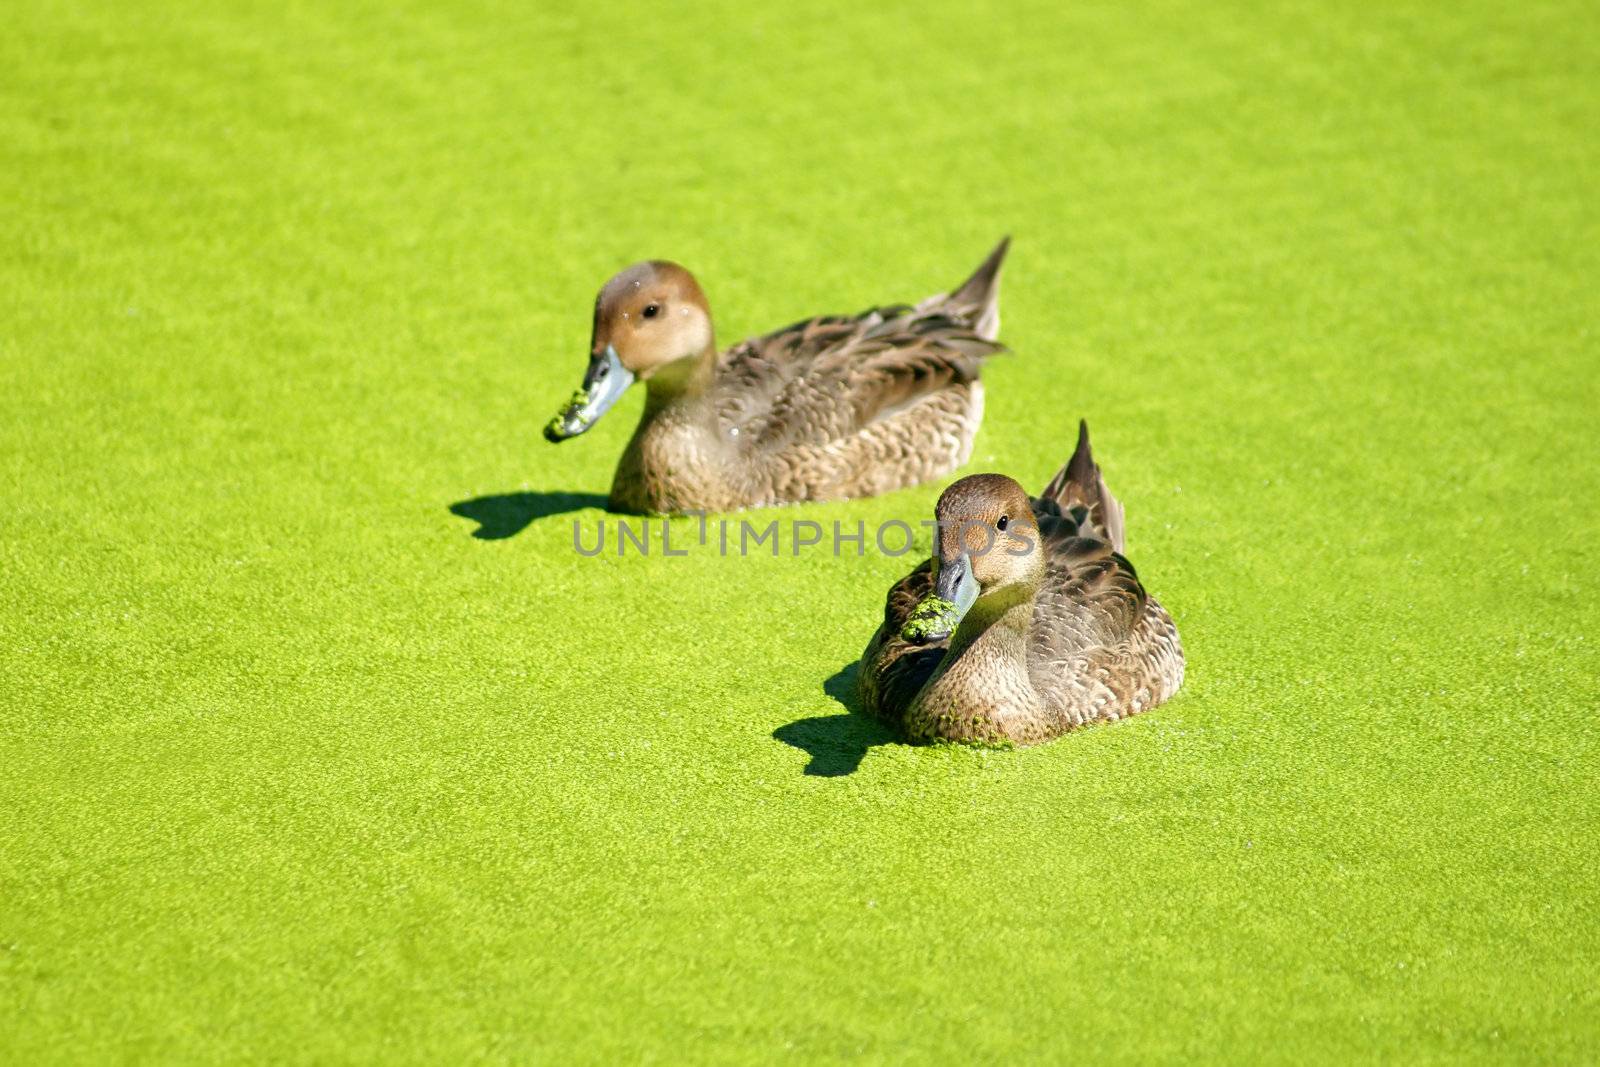 Couple of pintail ducks swimming in duckweed covered pond which looks like green pea soup.